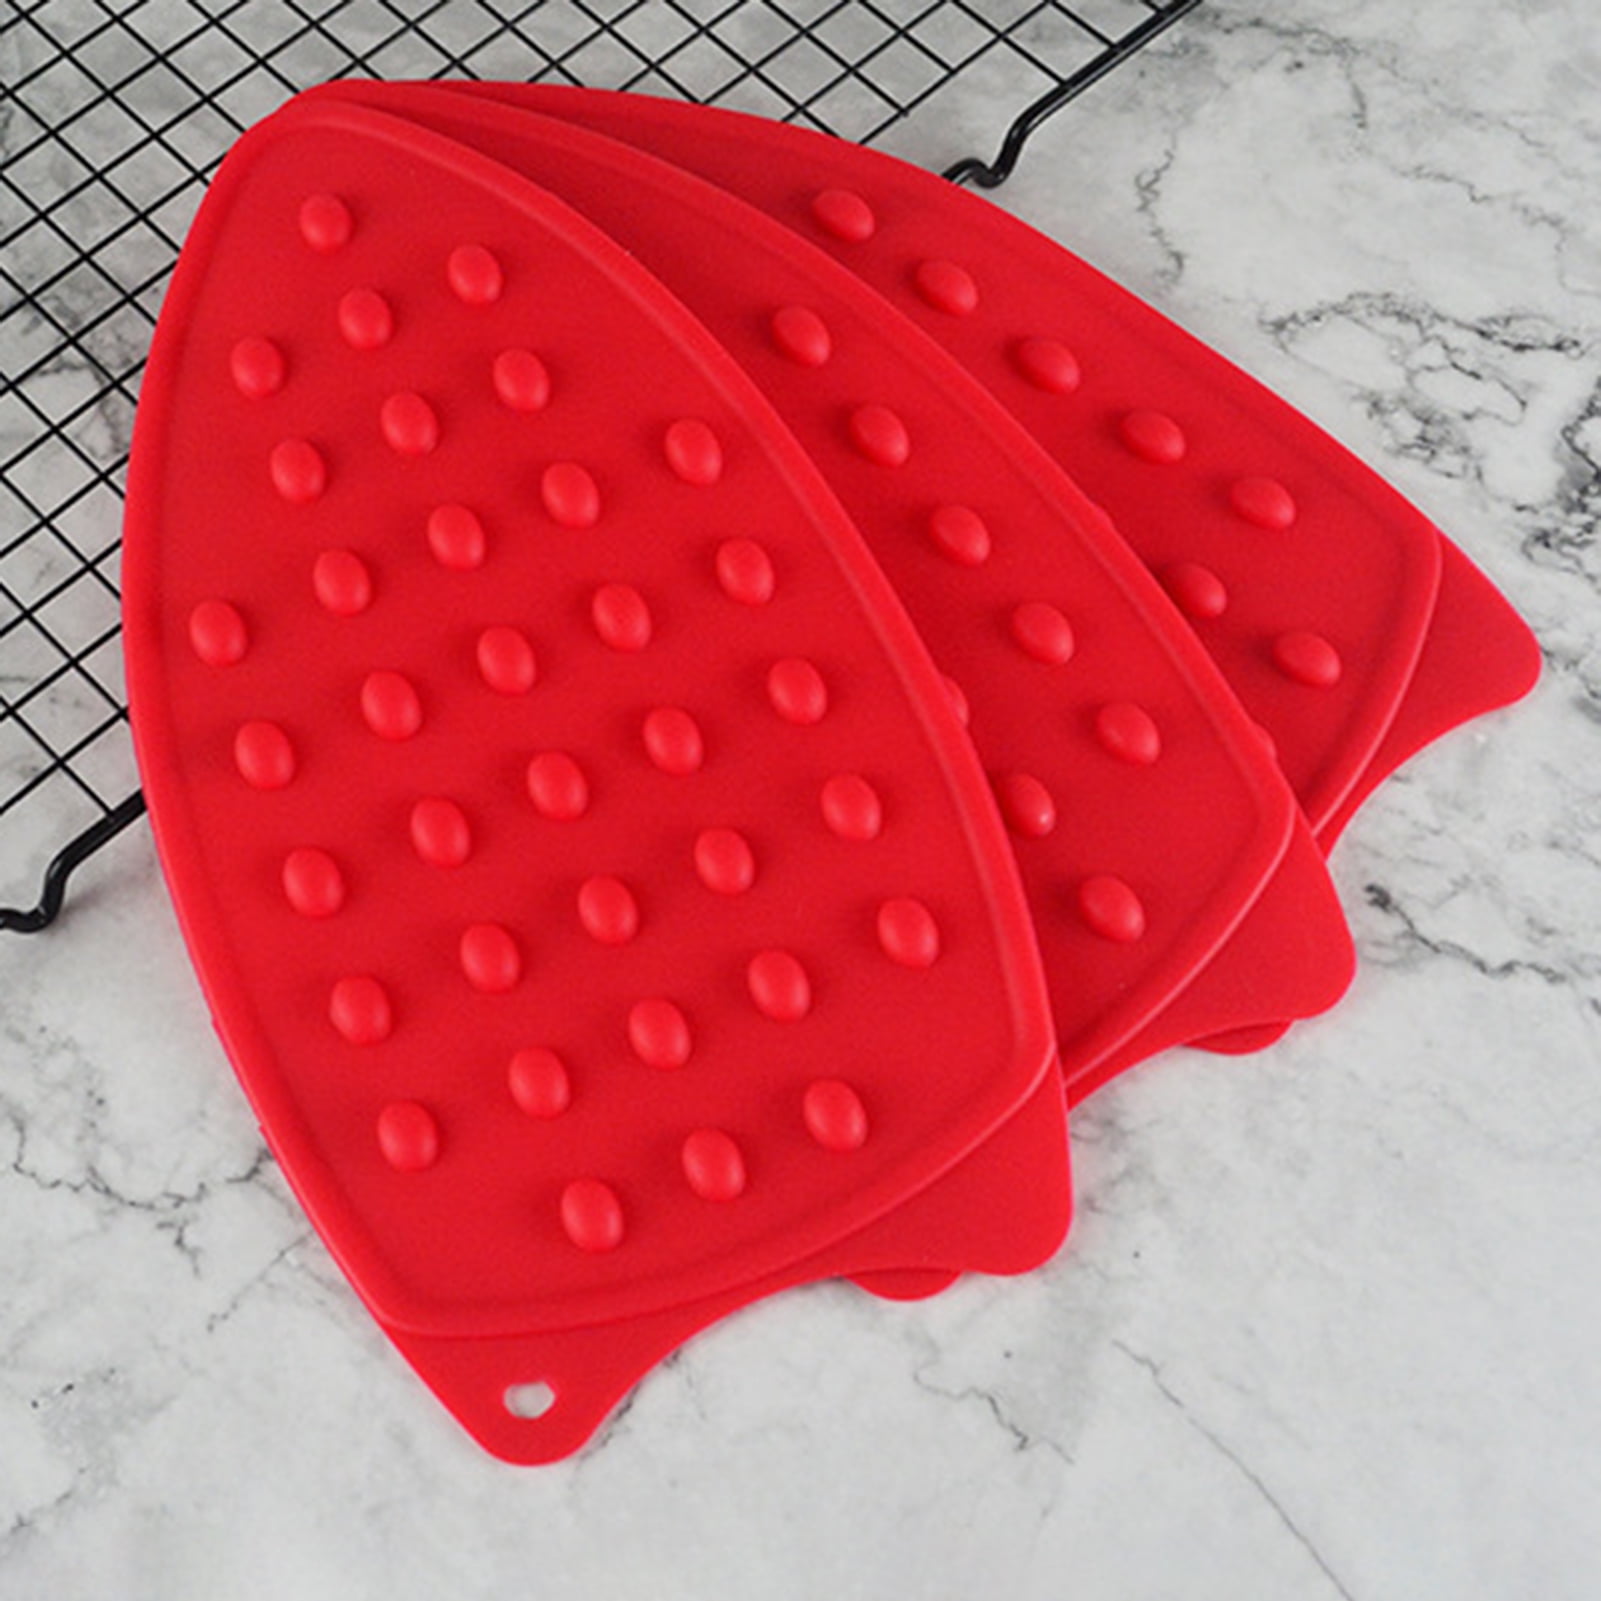 Tangser Multipurpose Silicone Iron Rest Pad for Ironing Board Hot Resistant  Mat,Silicone Heat Resistant Iron Rest Pad (Orange)